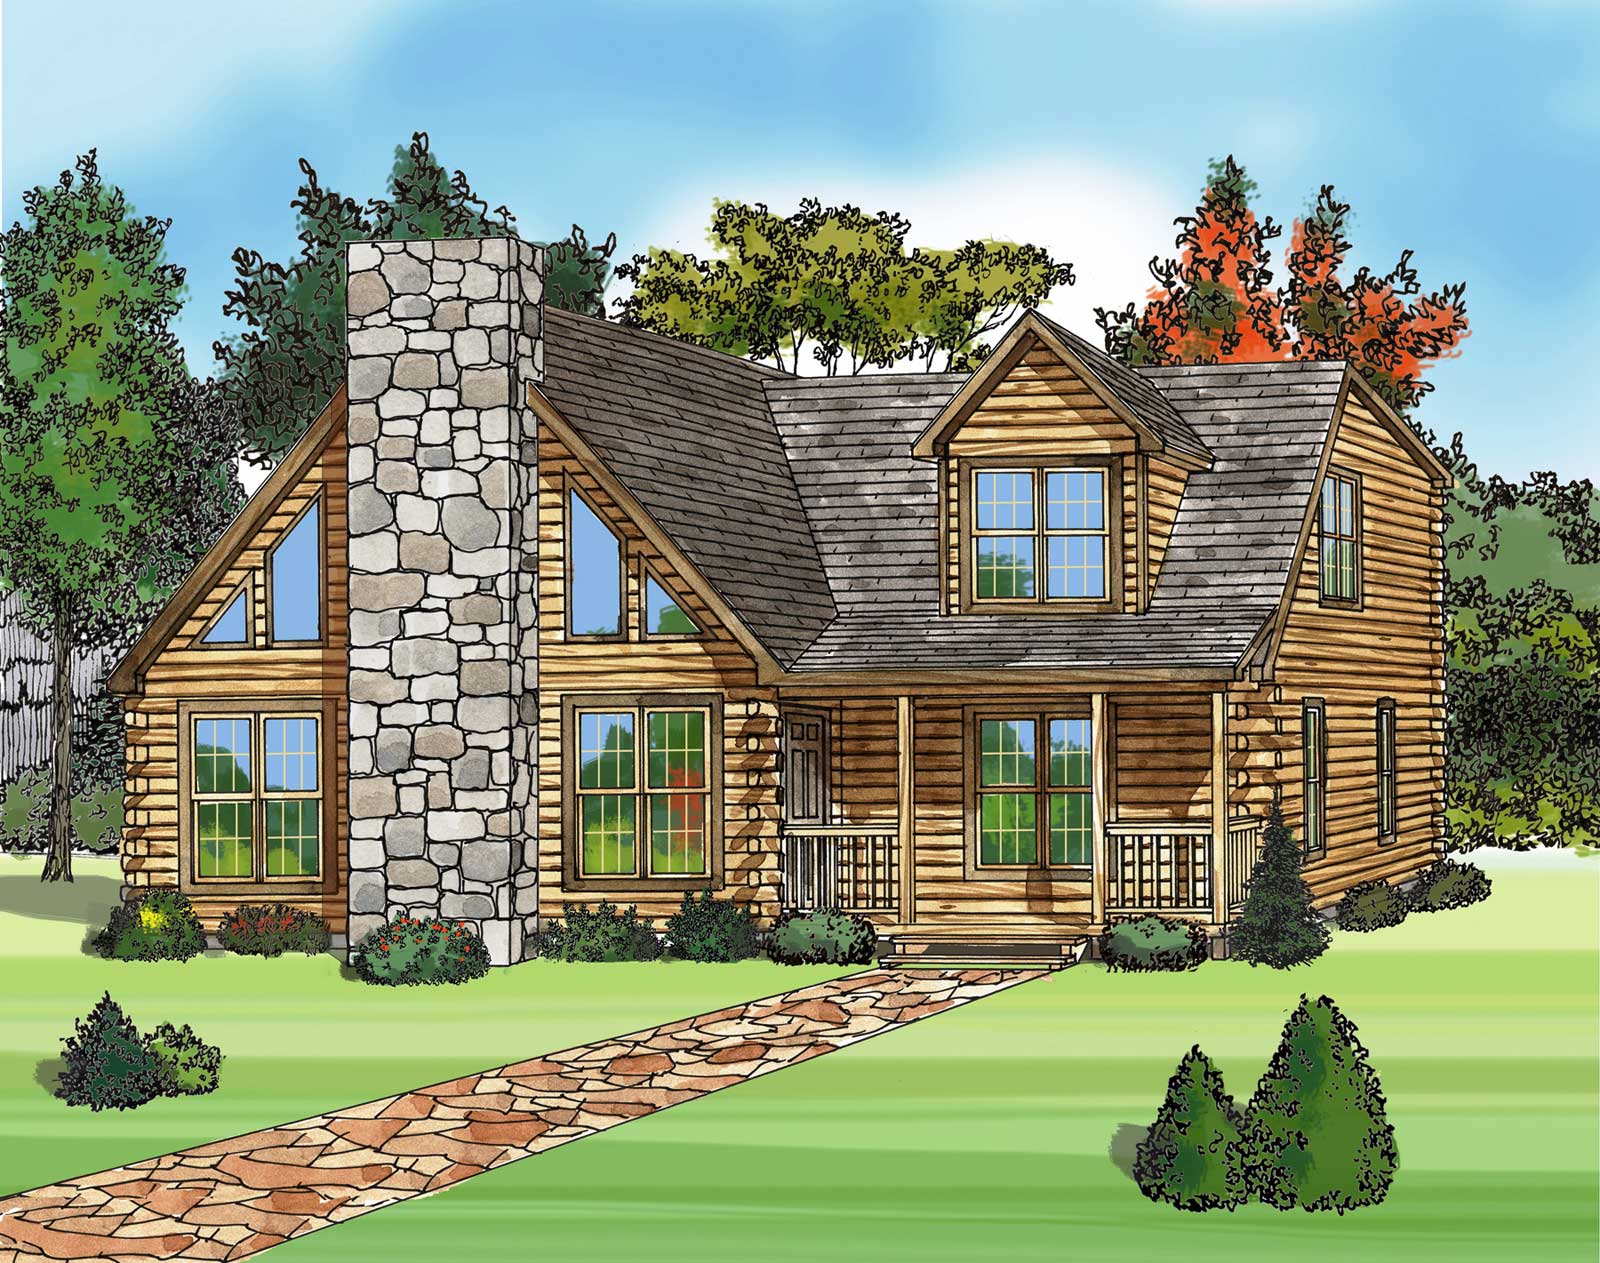 Luxury Log Front Amazing Luxury Log Home Plans Front Yard Area Finished With Lawn Area With Stone Walkway Design And Green View Architecture  Luxury Log Home Plans For Bold Natural Image 